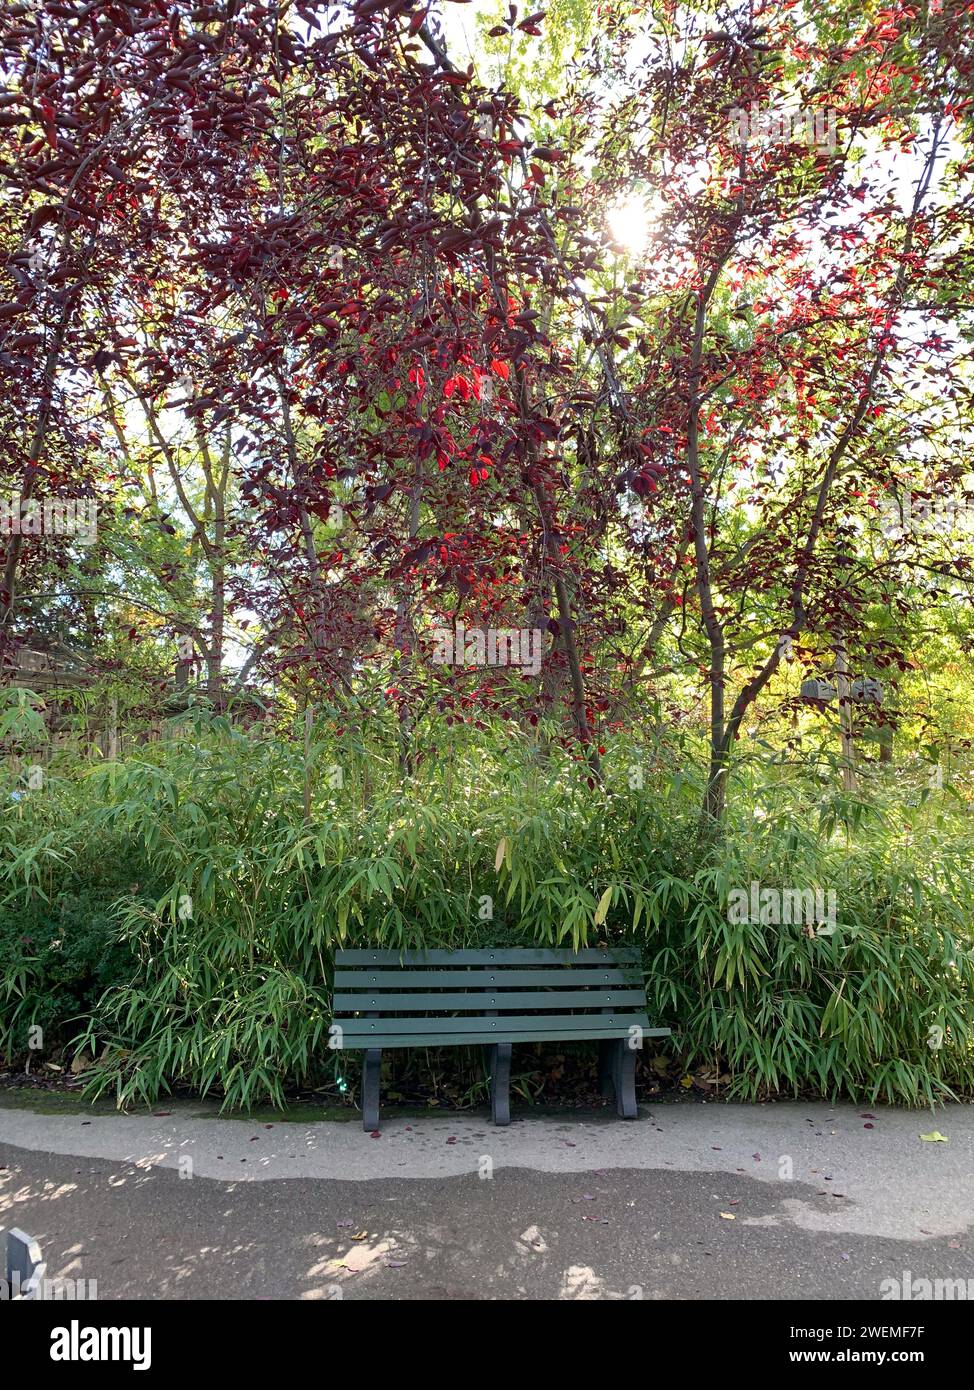 Secluded Bench in Lush Garden Setting Stock Photo